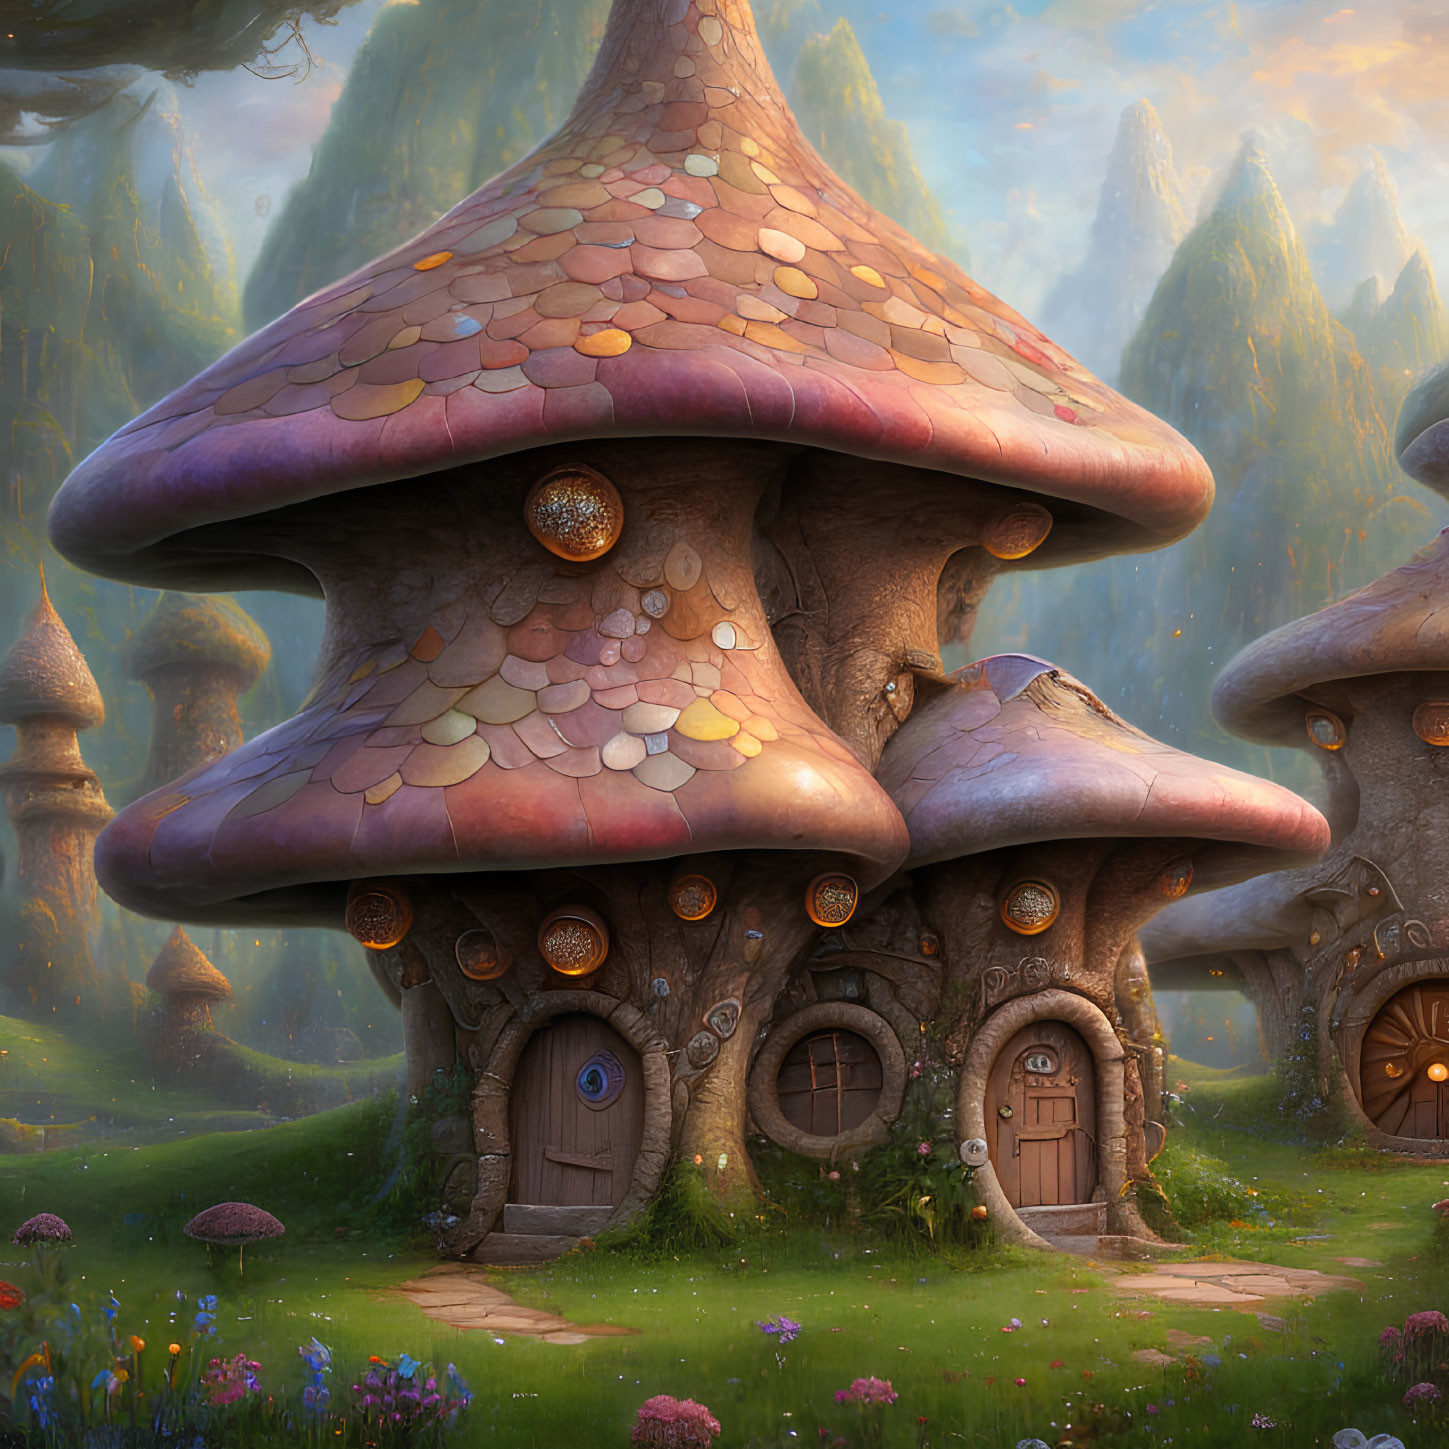 Fantasy Mushroom Houses in Magical Forest Glade